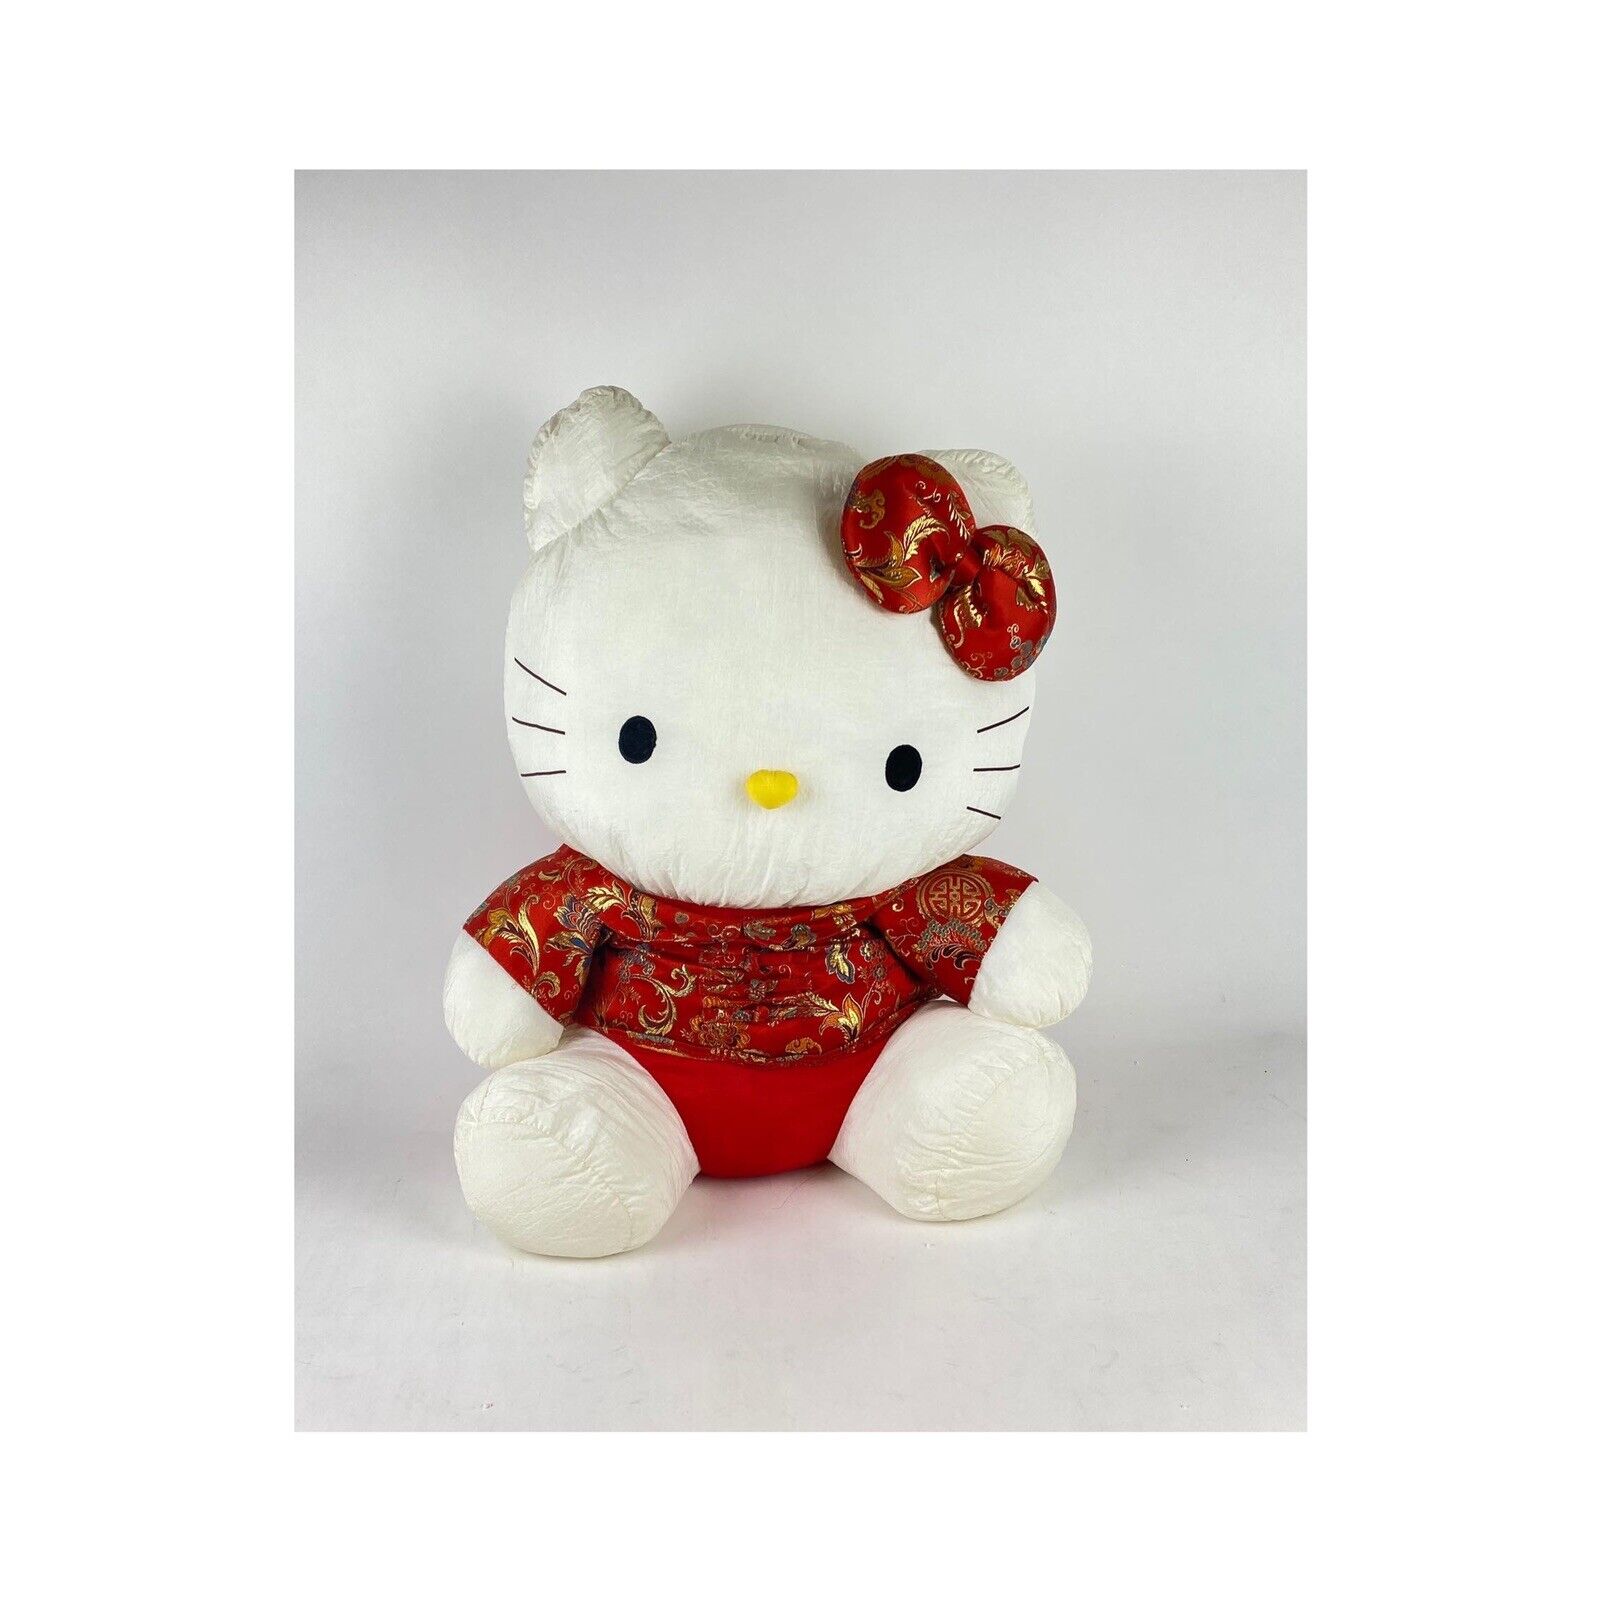 Rare Vintage Japan Sanrio Hello Kitty 19in Plush with Bag Red Bow 1996